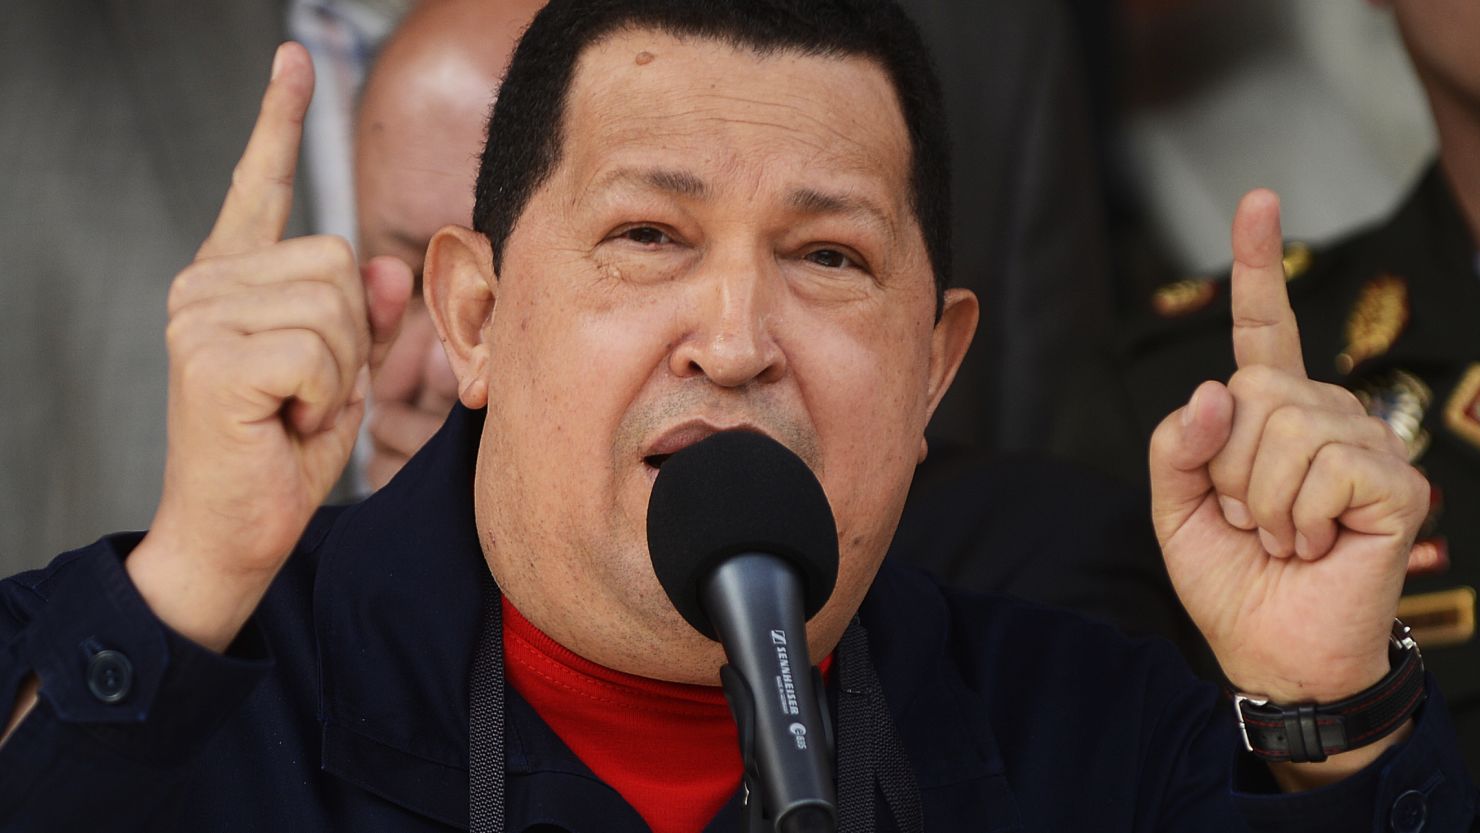 Globovision is Venezuela's last remaining television broadcaster that is openly critical of President Hugo Chavez, who is pictured here on June 22, 2012. 